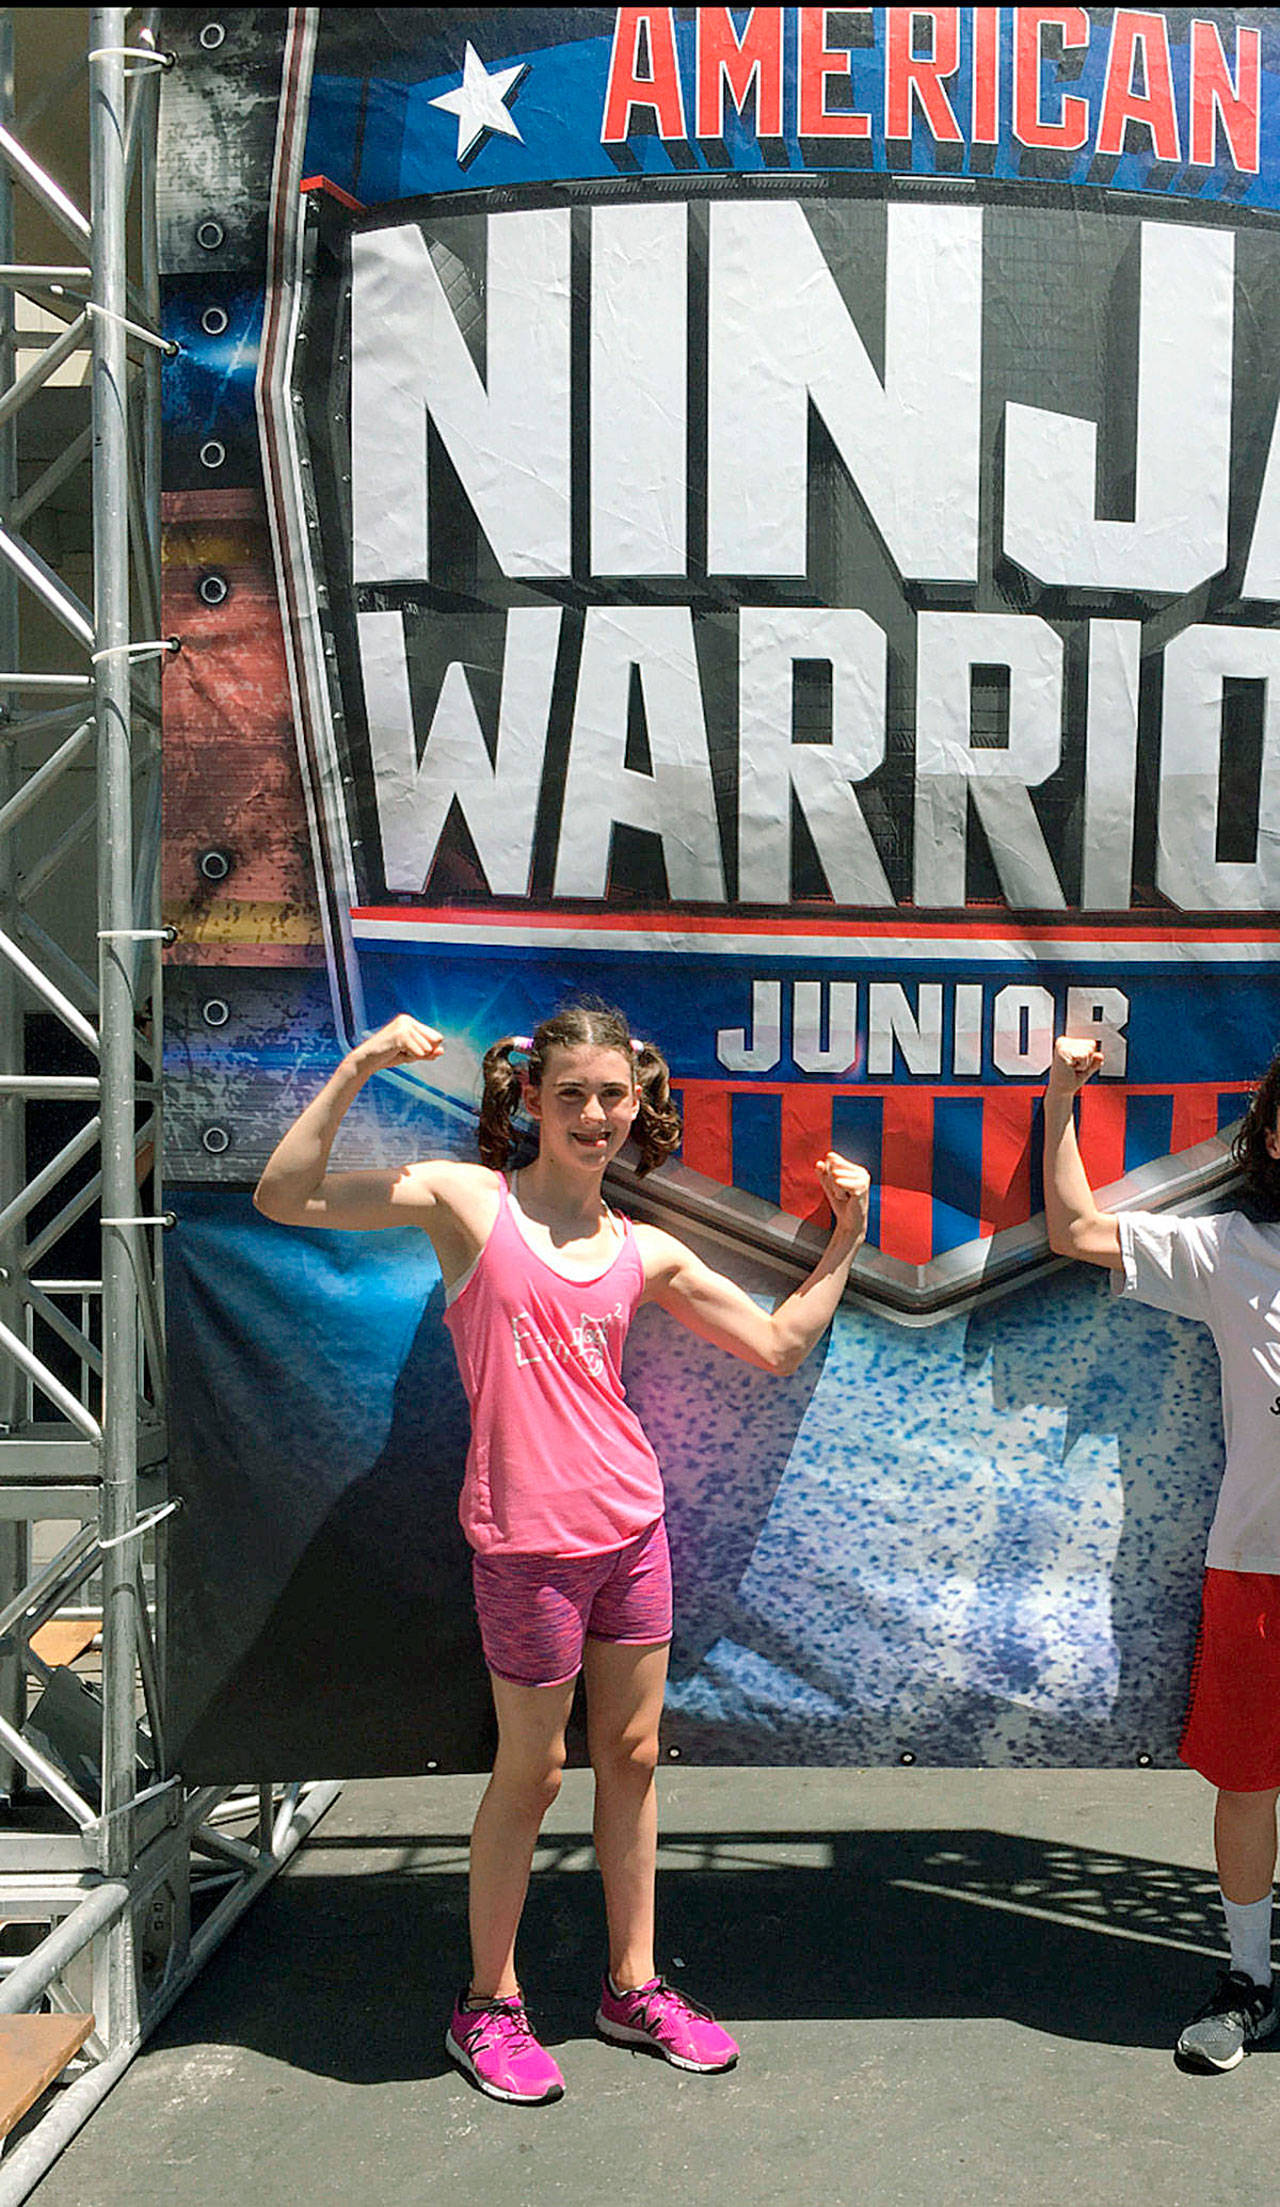 McRitchie, a Woodward Middle School student was a finalist in the debut season of “American Ninja Warrior Junior.” (Image courtesy of Melissa McRitchie)